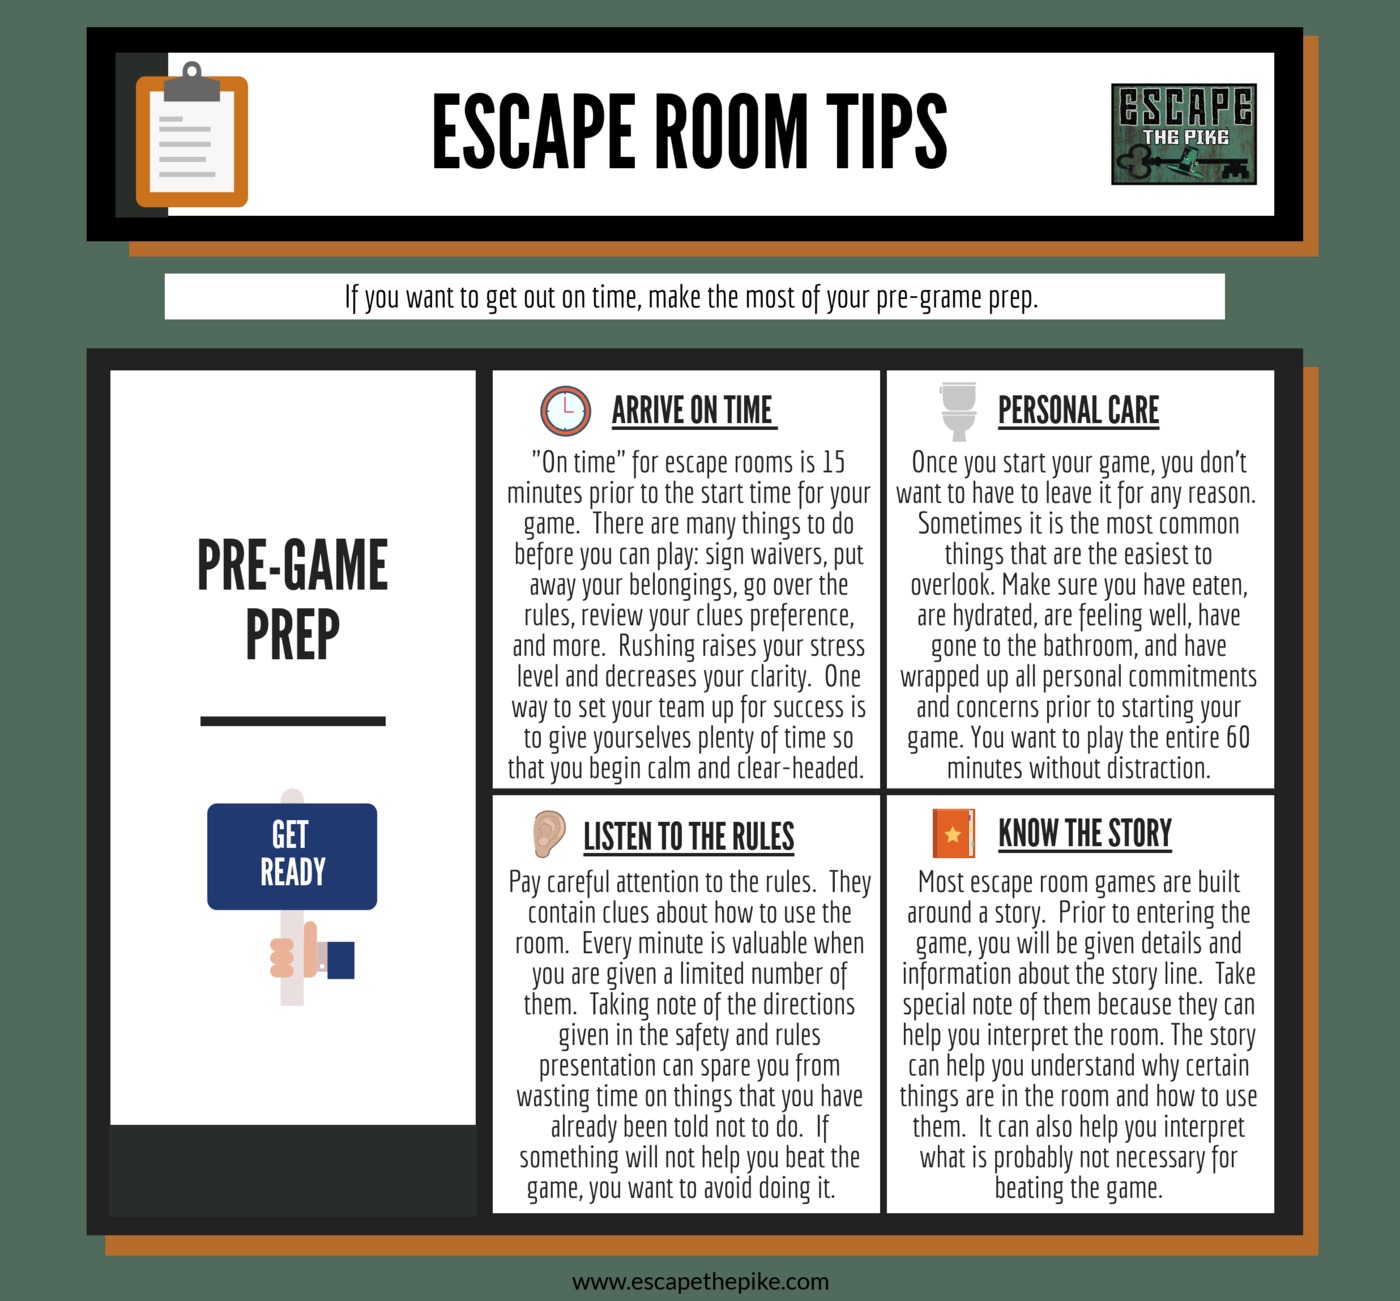 What is an escape room?